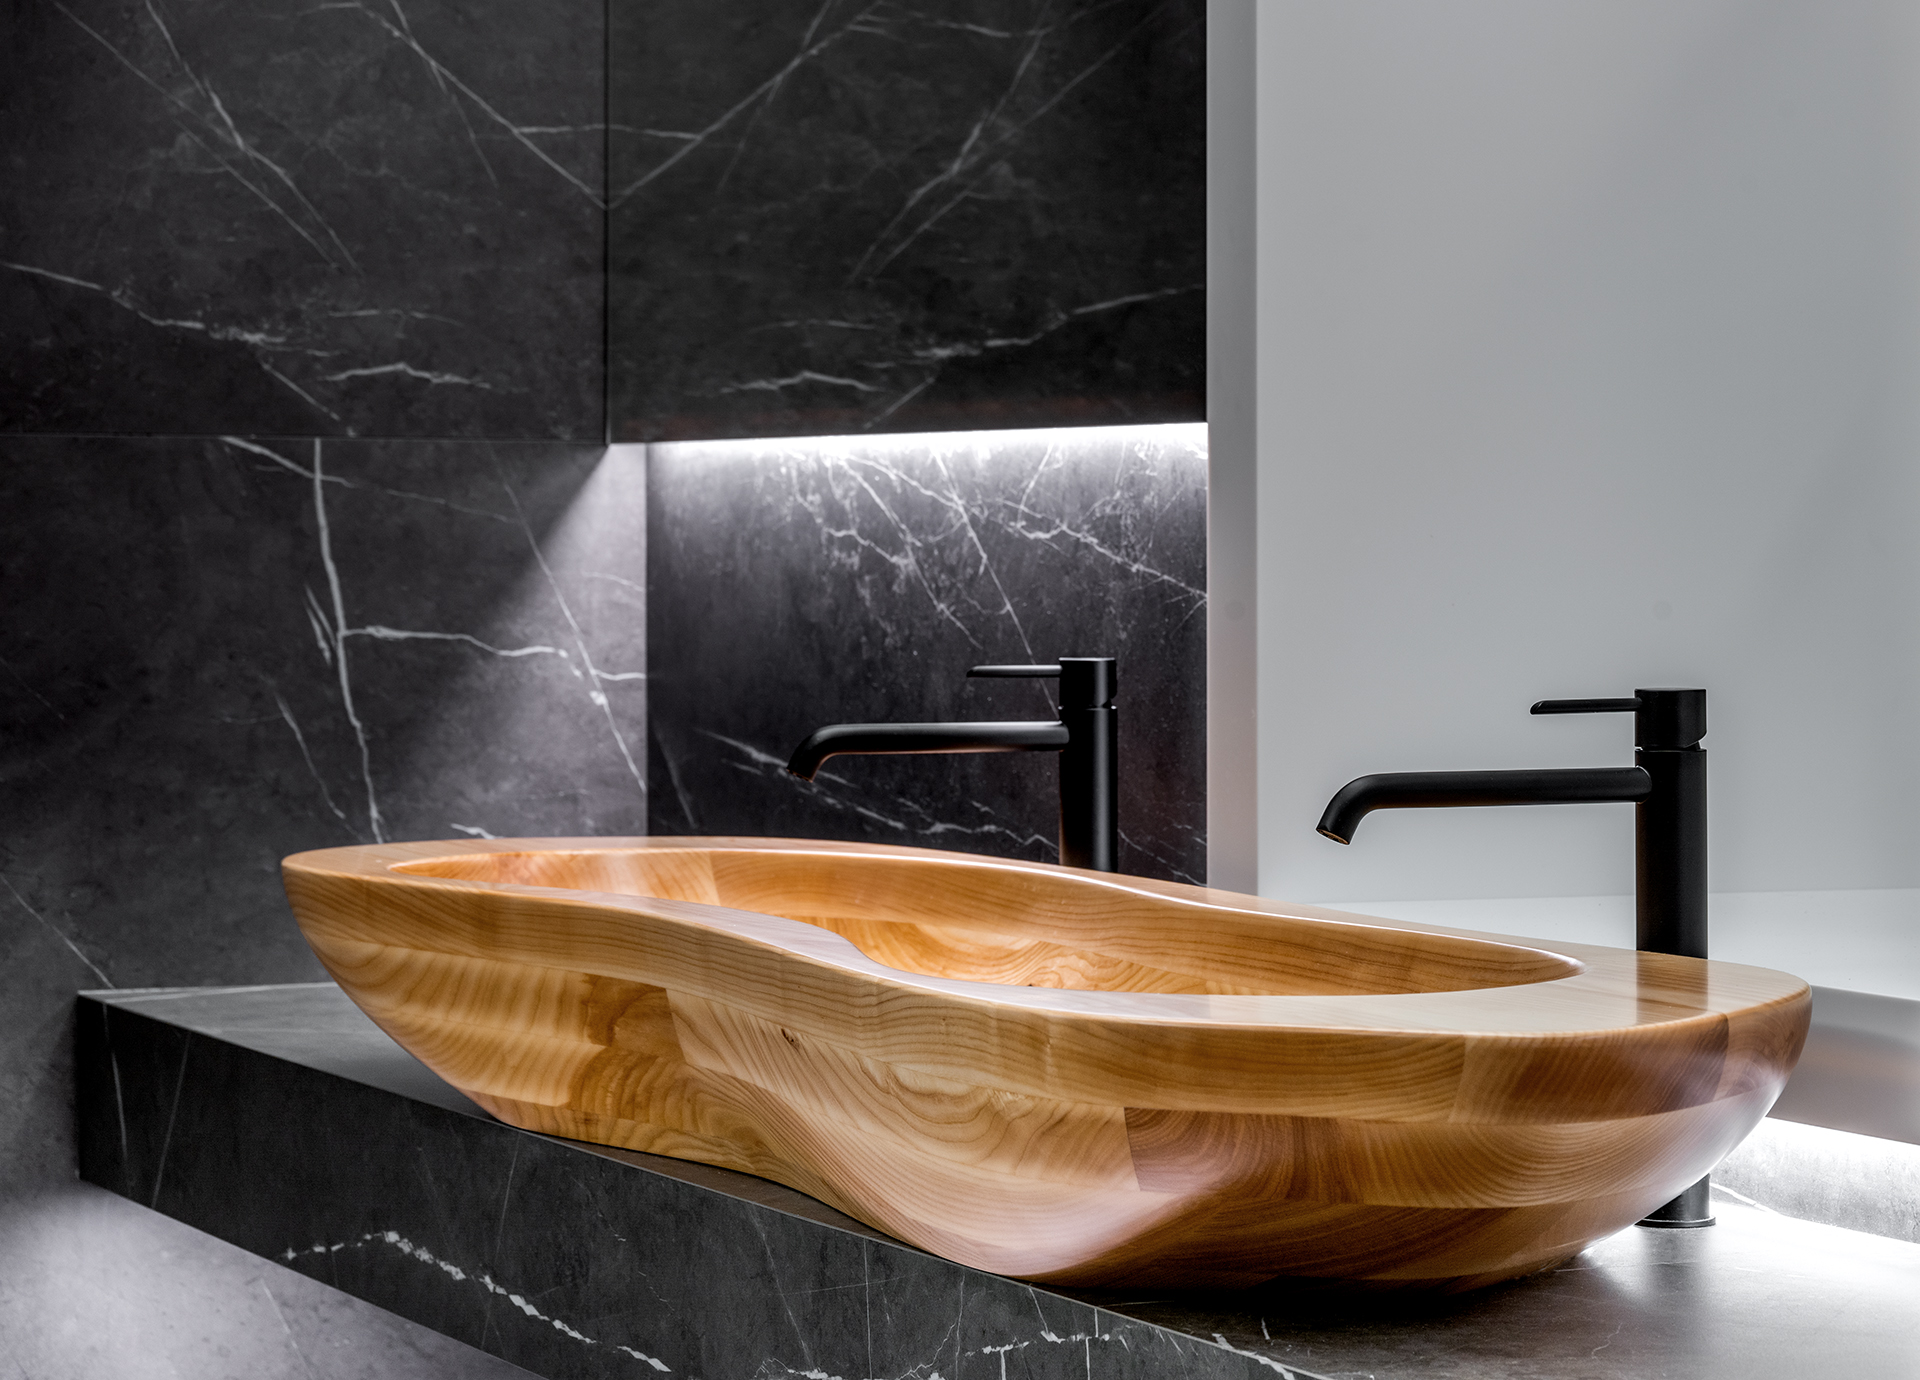 Image no. 8 of Custom bathtub and washbasin crafted in Ash wood - Defacto